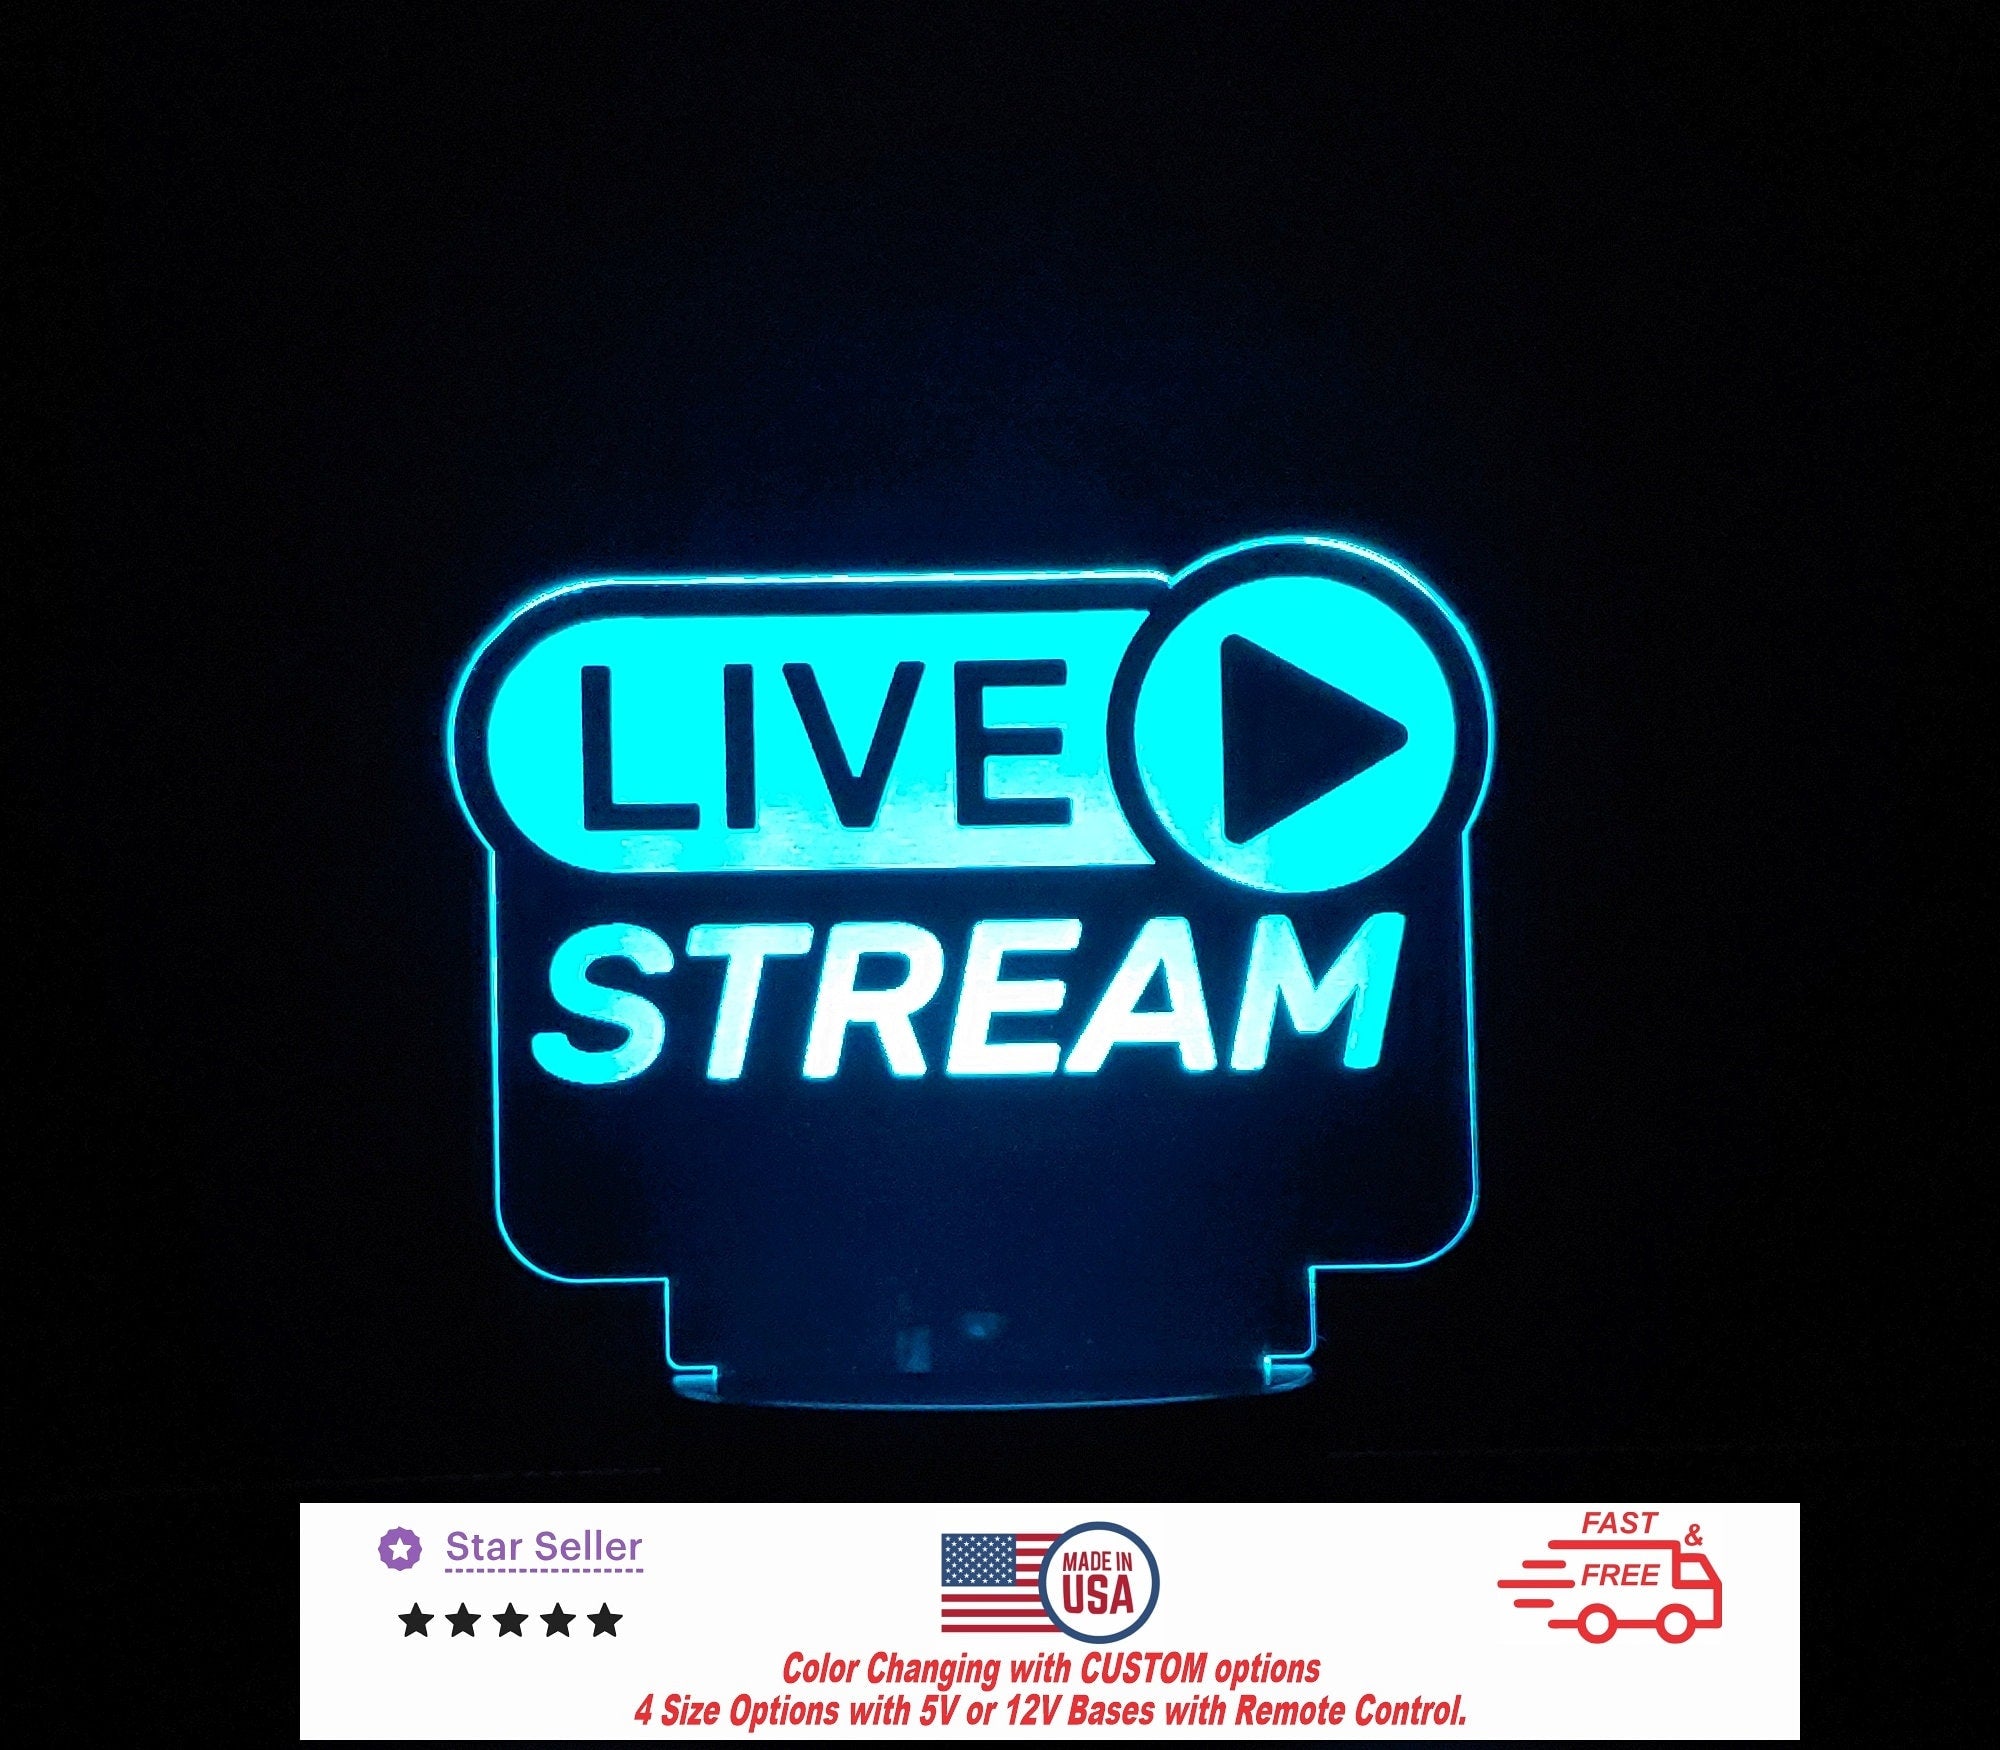 Live Stream Personalized LED Night Light - Neon sign, Room Decor, Recording Music, Streaming, Music Studio 4 sizes Free Shipping Made in USA